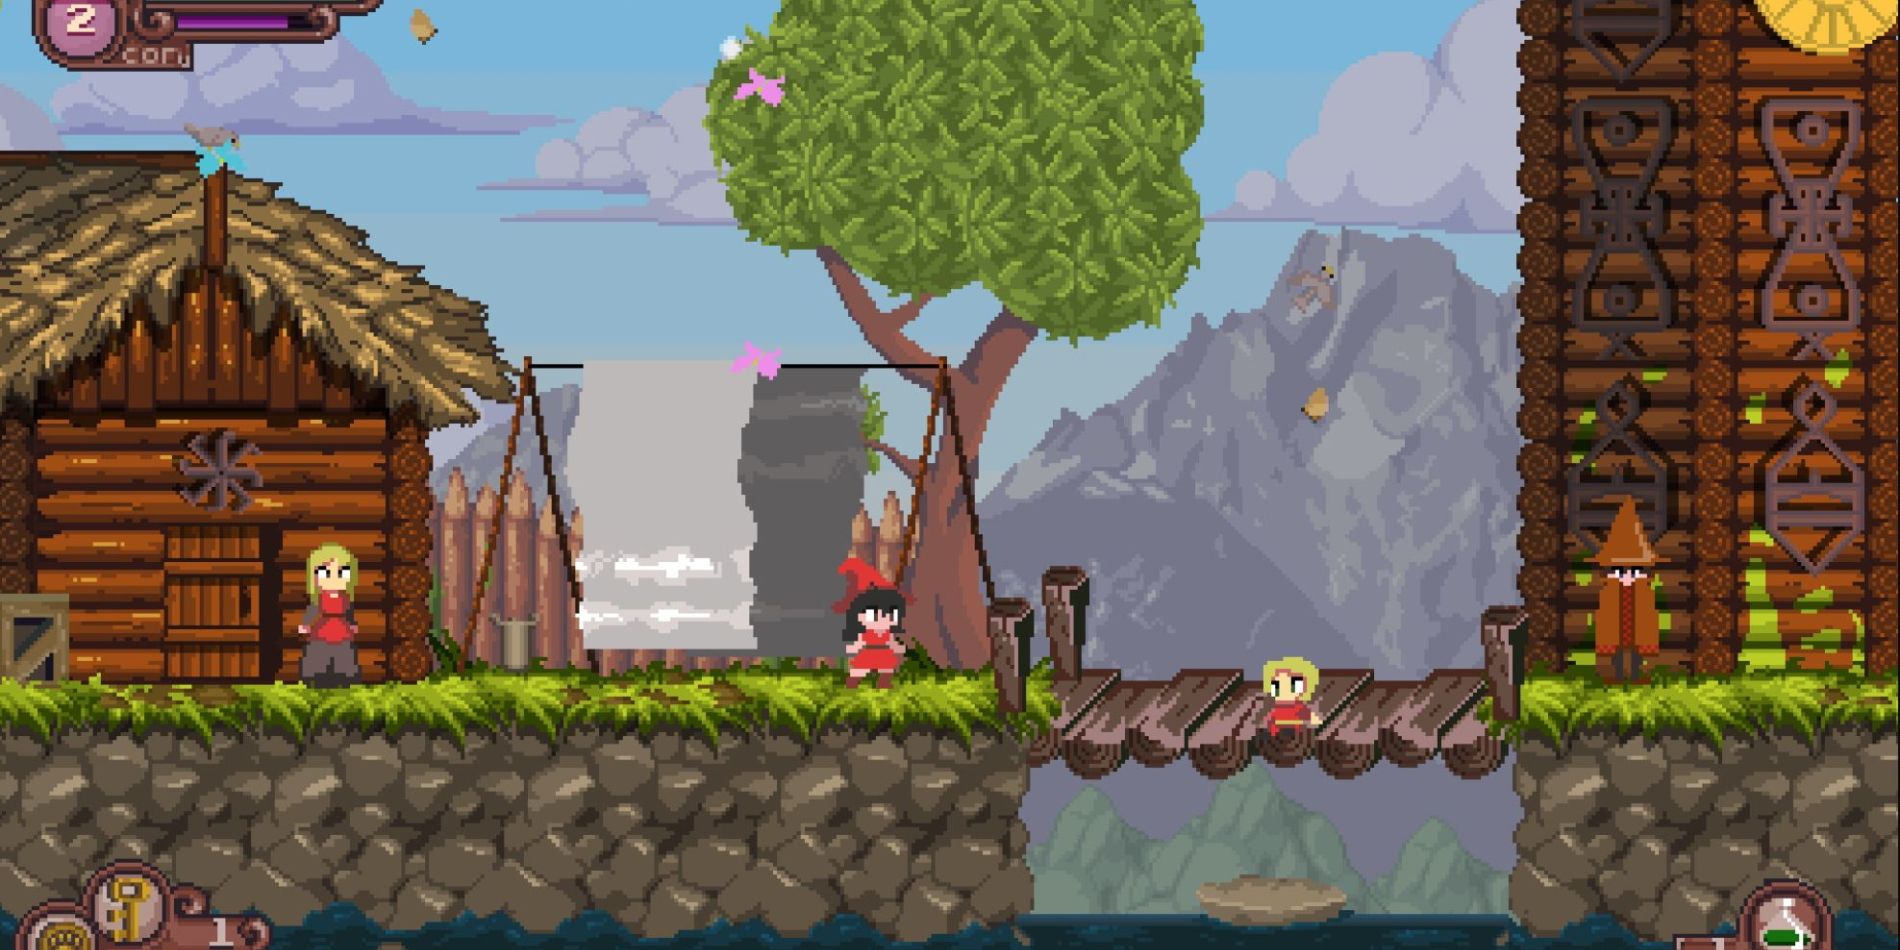 A screenshot from the game Catmaze